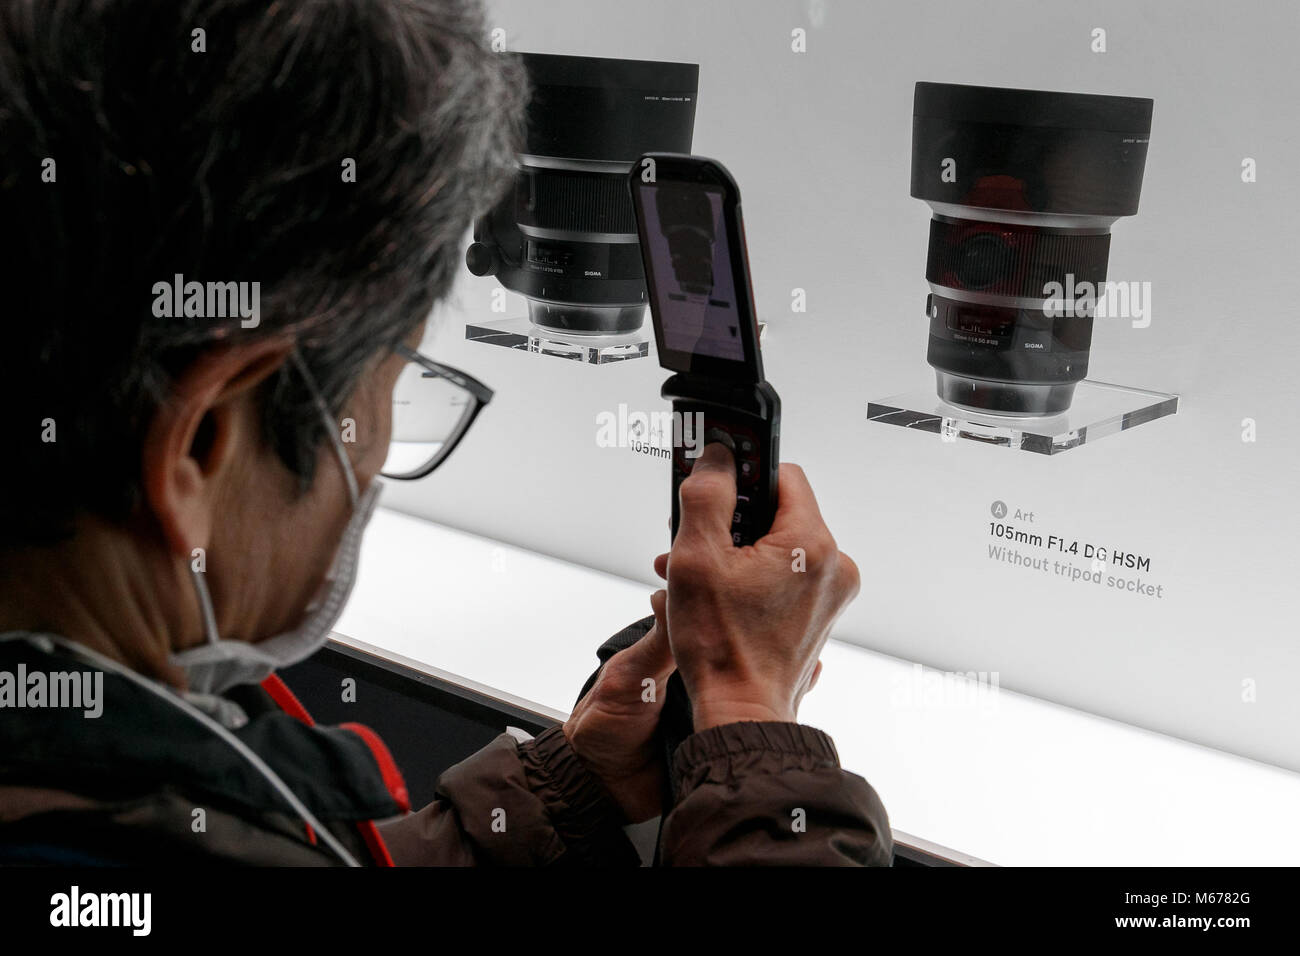 Yokohama, Japan. 1st Mar, 2018. A man takes a picture of the new Sigma lens 105mm F1.4 DG HSM Art on display at the CP  Camera & Photo Imaging Show 2018 on March 1, 2018, Yokohama, Japan. CP  is Japan's largest camera and photo imaging exhibition. This year, 1,123 exhibitor booths and approximately 70,000 visitors are expected during the four-day trade show which is held at the Pacifico Yokohama and OSANBASHI Hall until March 4th. Credit: Rodrigo Reyes Marin/AFLO/Alamy Live News Stock Photo